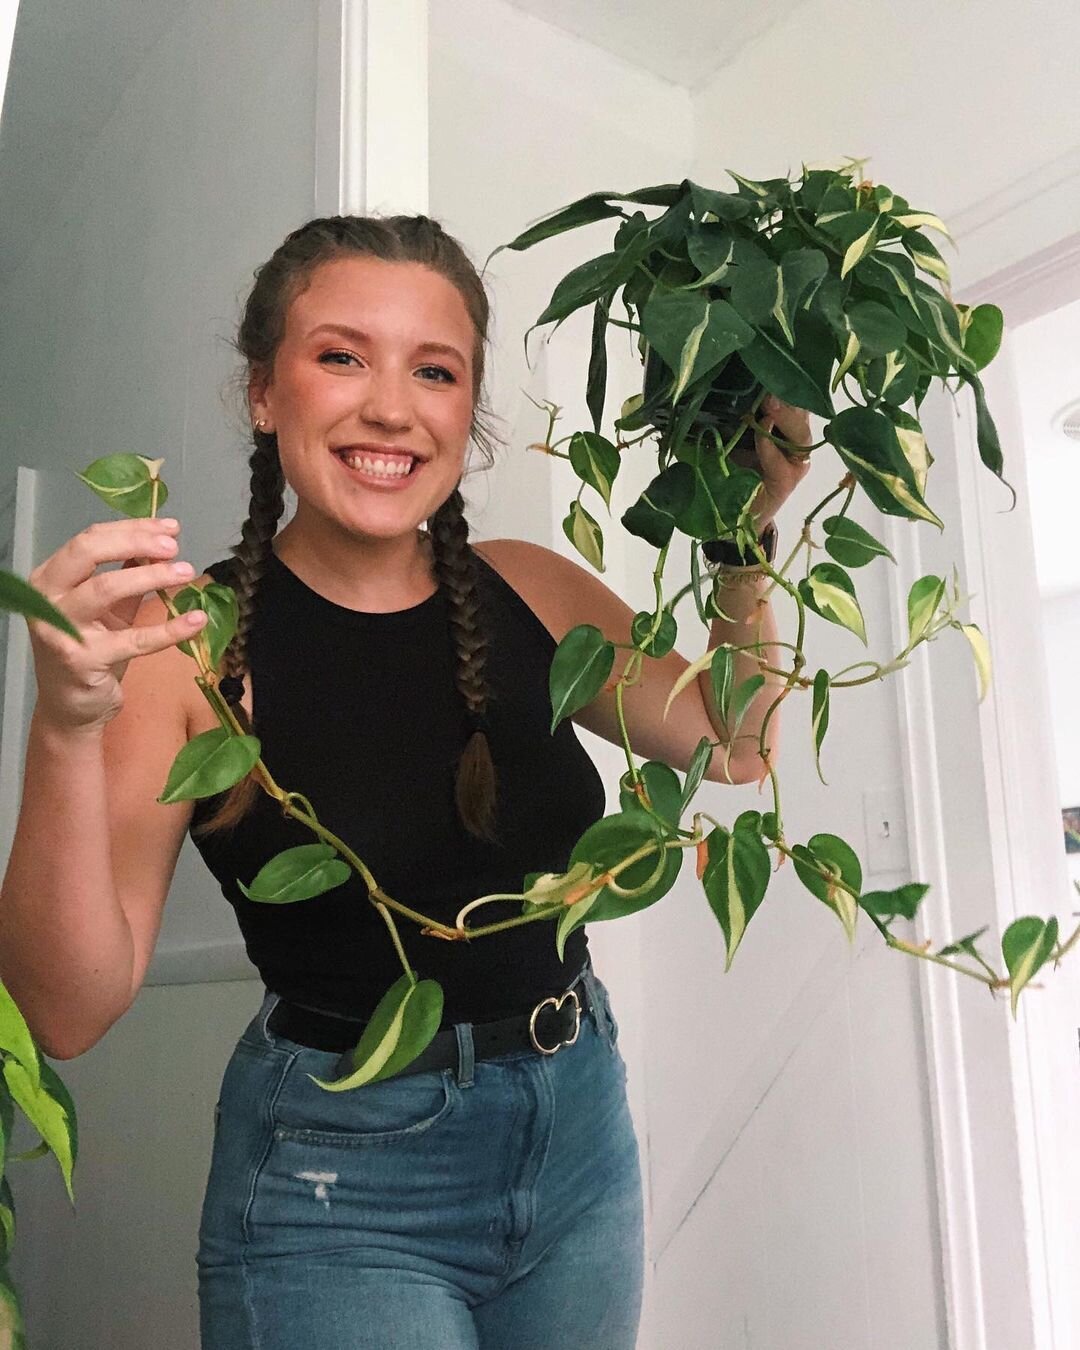 We're featuring Crazy Plant People from all over the world. Get involved, follow us and tag @crazyplantpeople in your portrait with your favourite plants! Don't forget to add a little story about yourself and why you love plants!
--
Featuring @planty